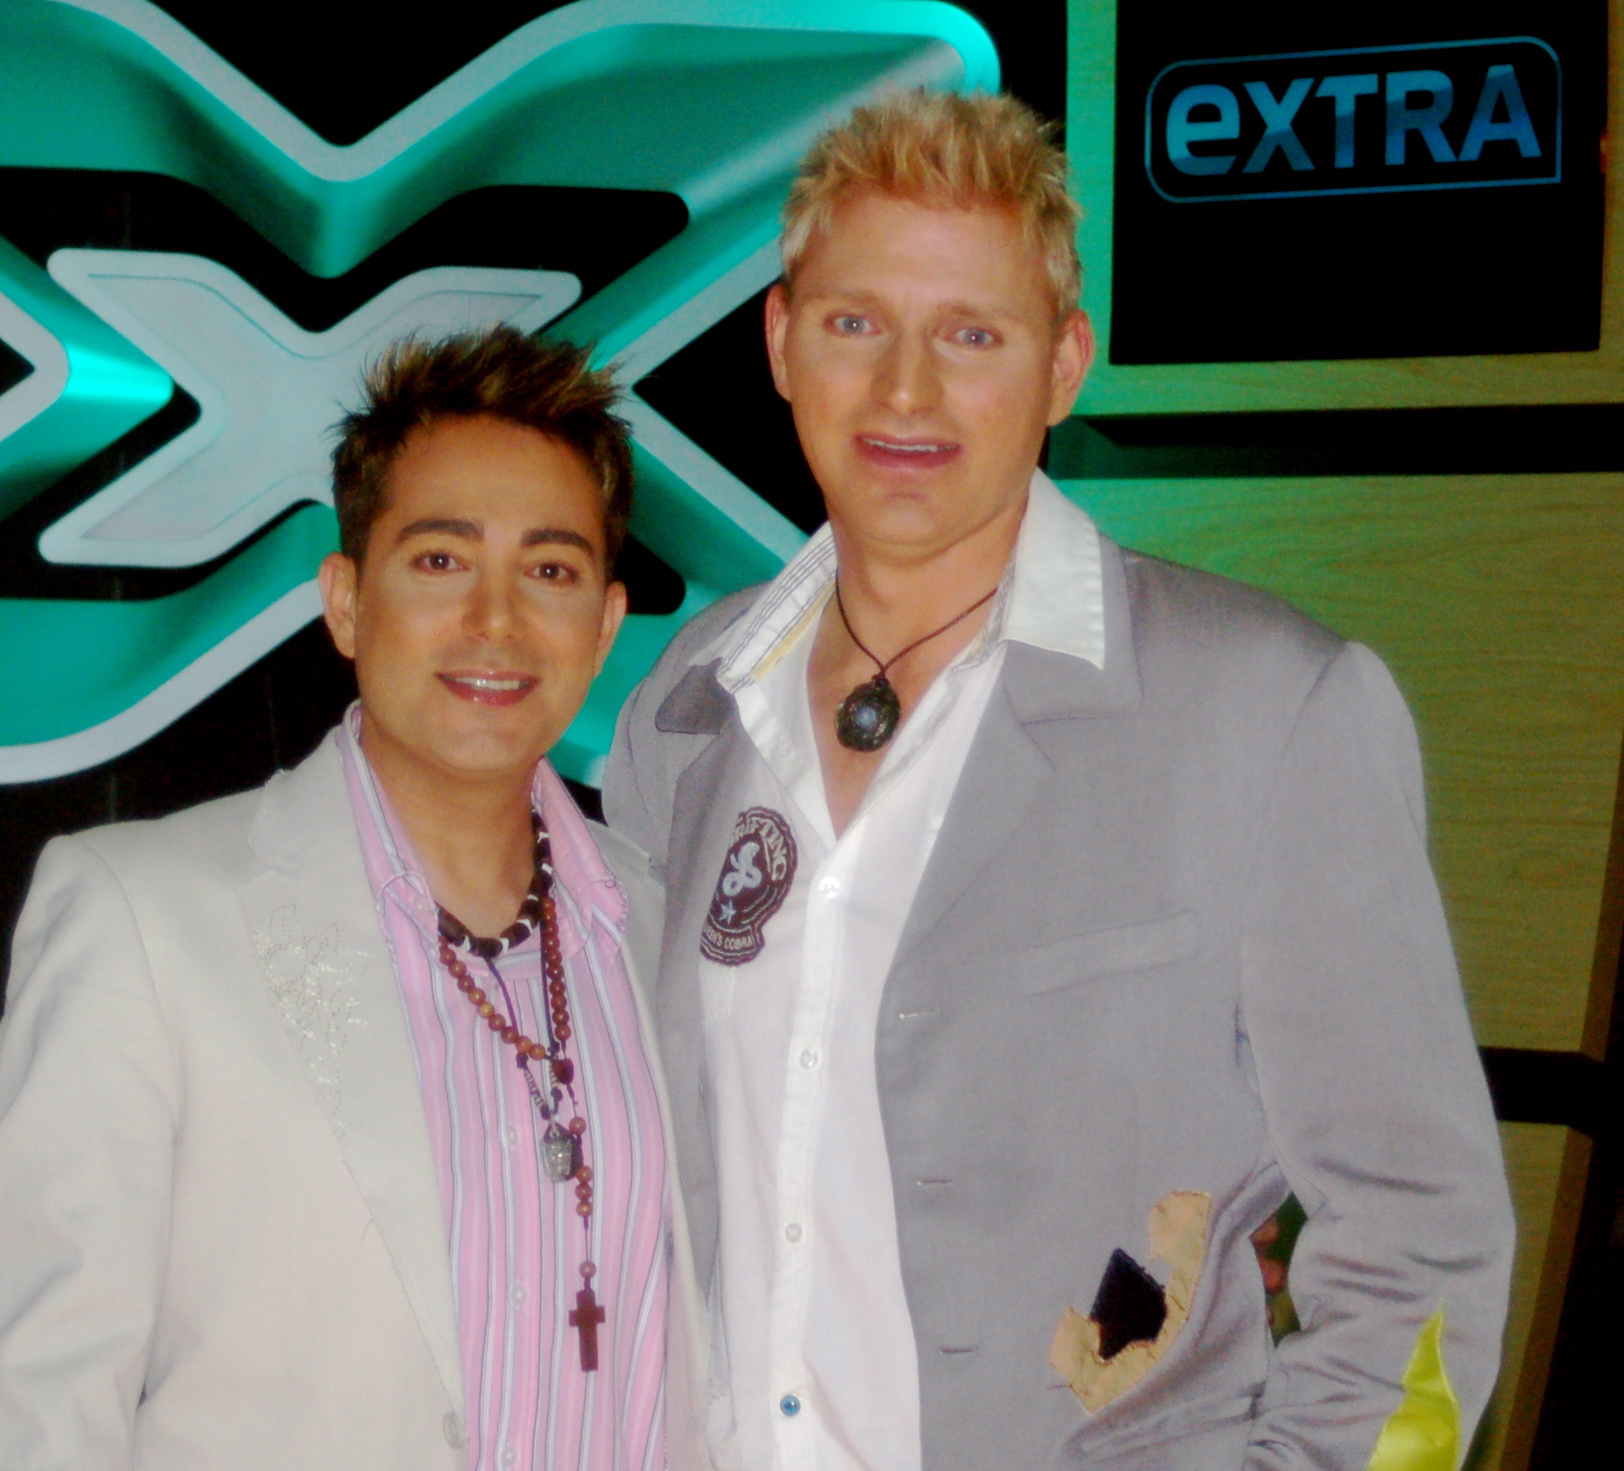 Patrik Simpson and Pol' Atteu Authors of Anna Nicole Smith - Portrait of An Icon interviewed on Extra!